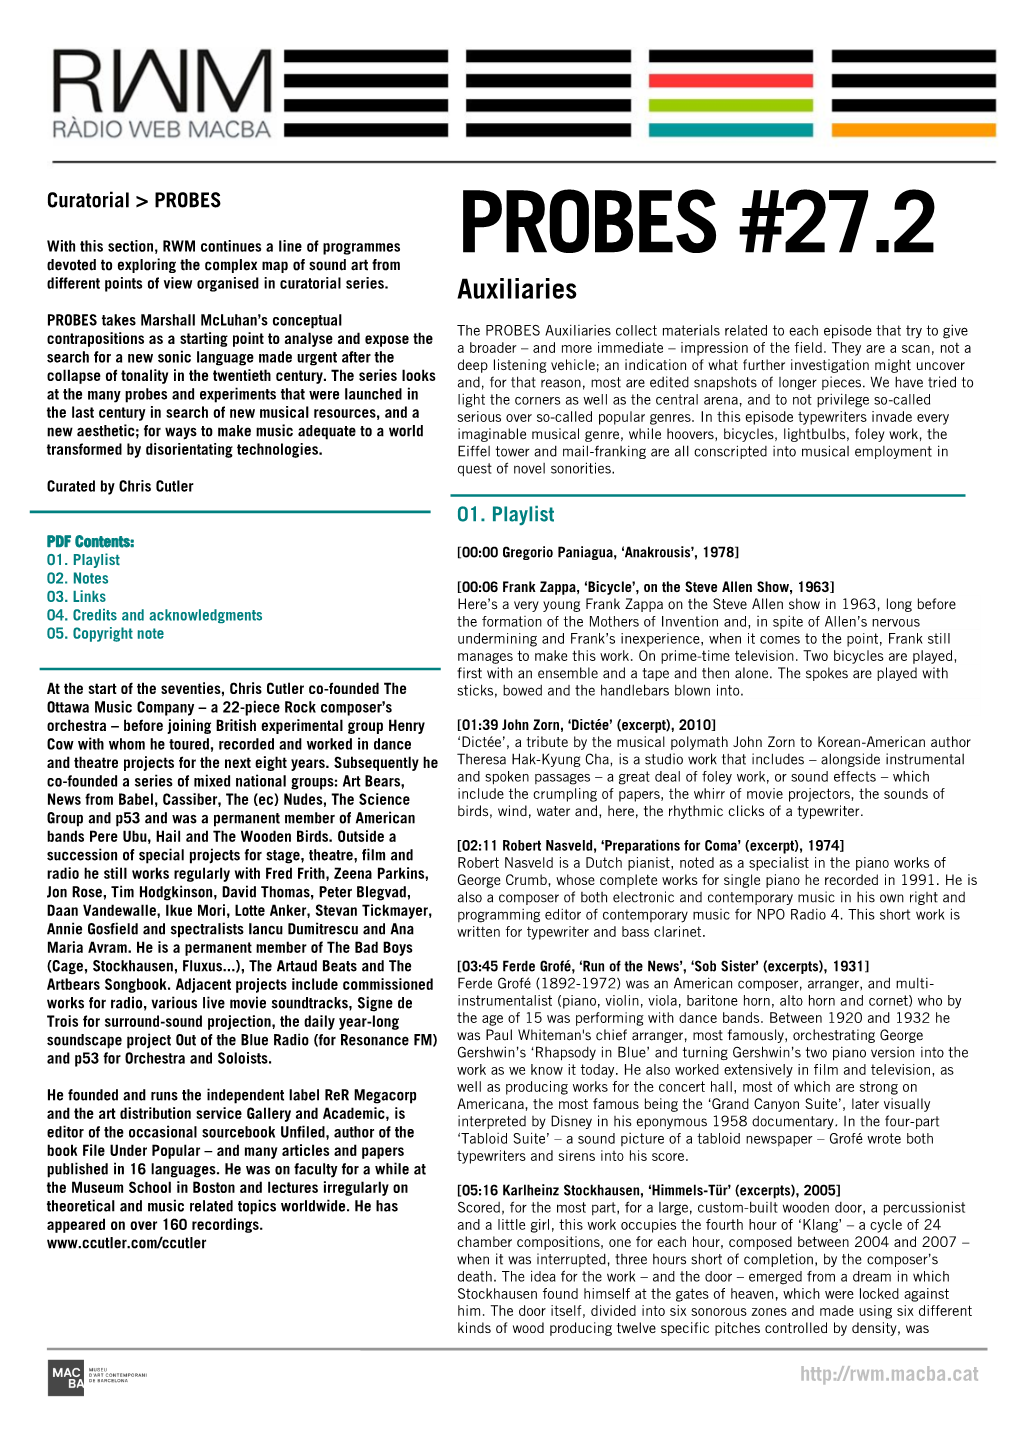 PROBES #27.2 Devoted to Exploring the Complex Map of Sound Art from Different Points of View Organised in Curatorial Series